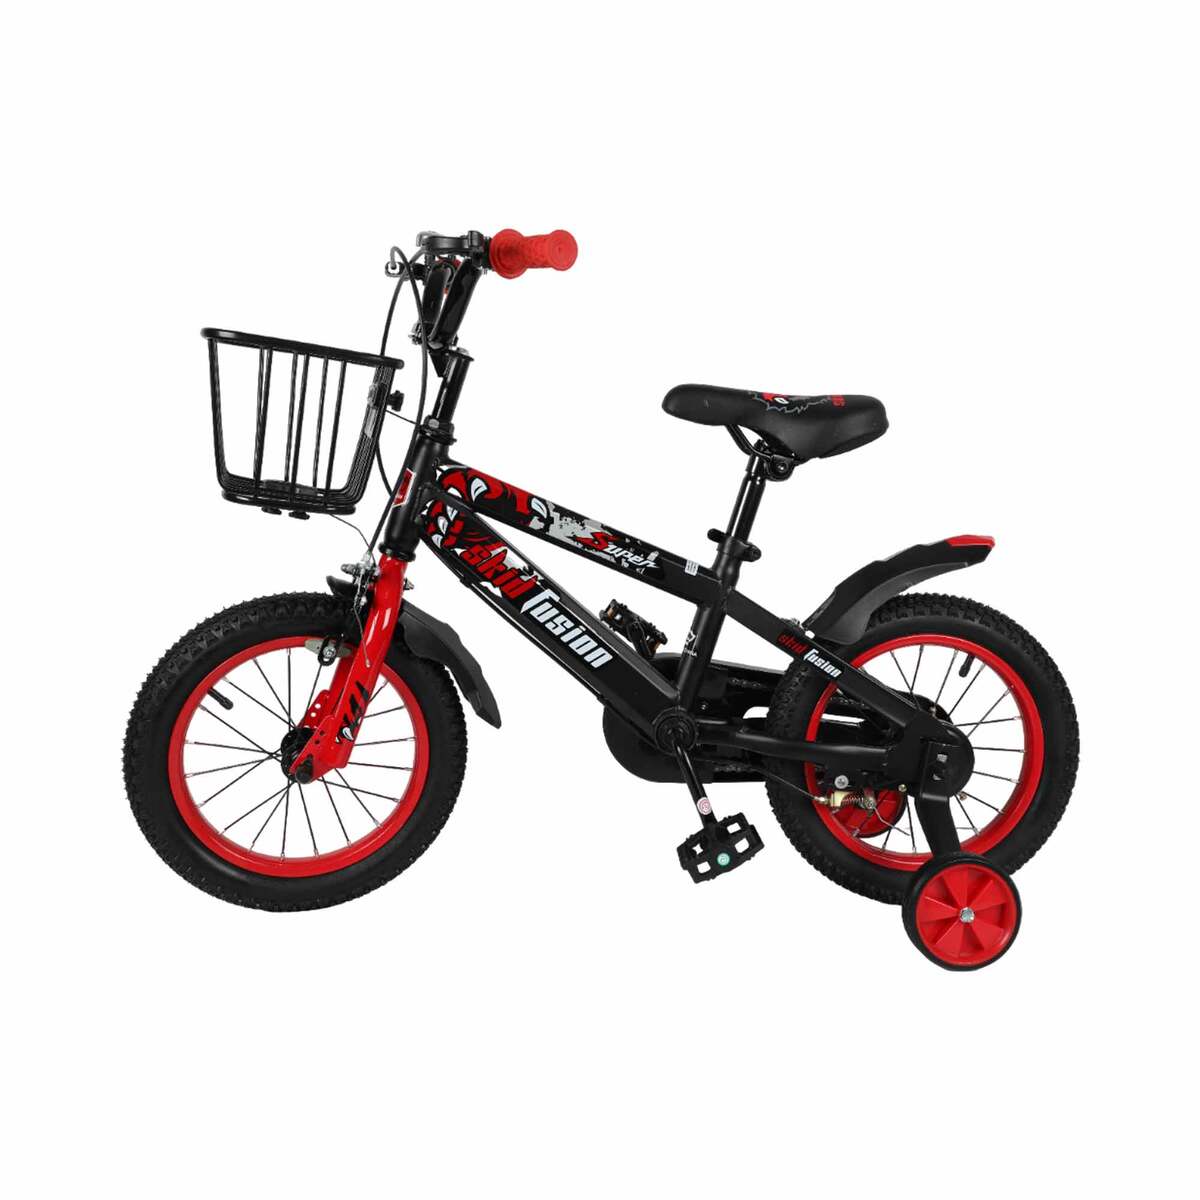 Skid Fusion Bicycle 14 inch Assorted color